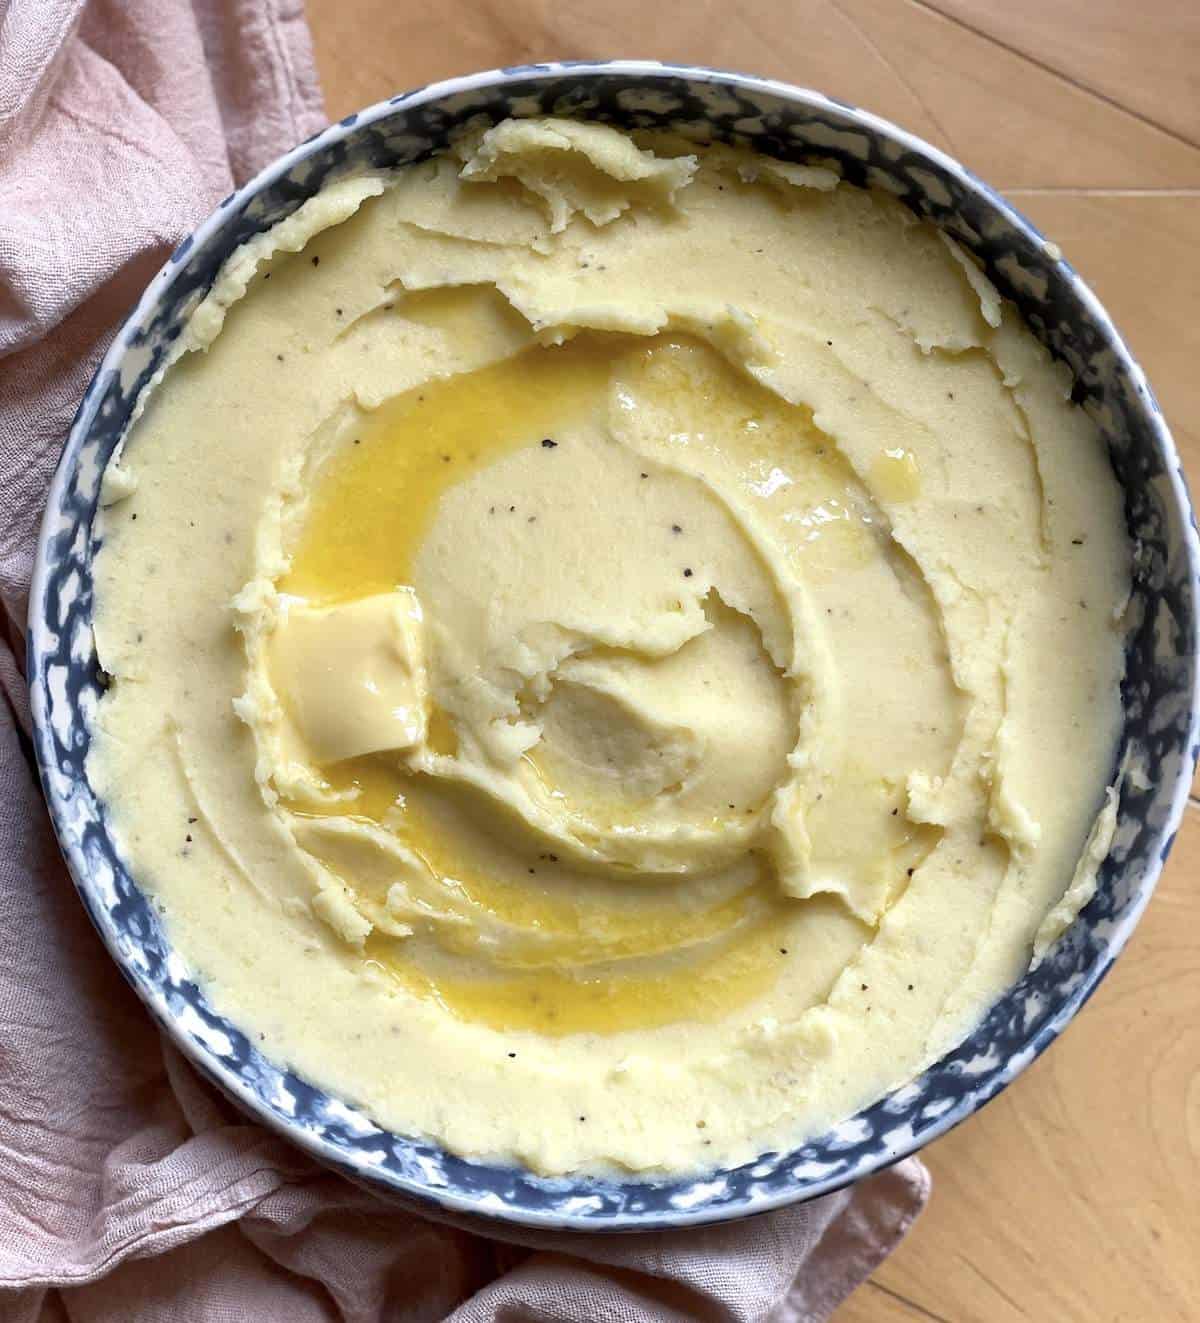 A blue bowl of buttermilk mashed potatoes with a pat of butter and some melted butter on top.